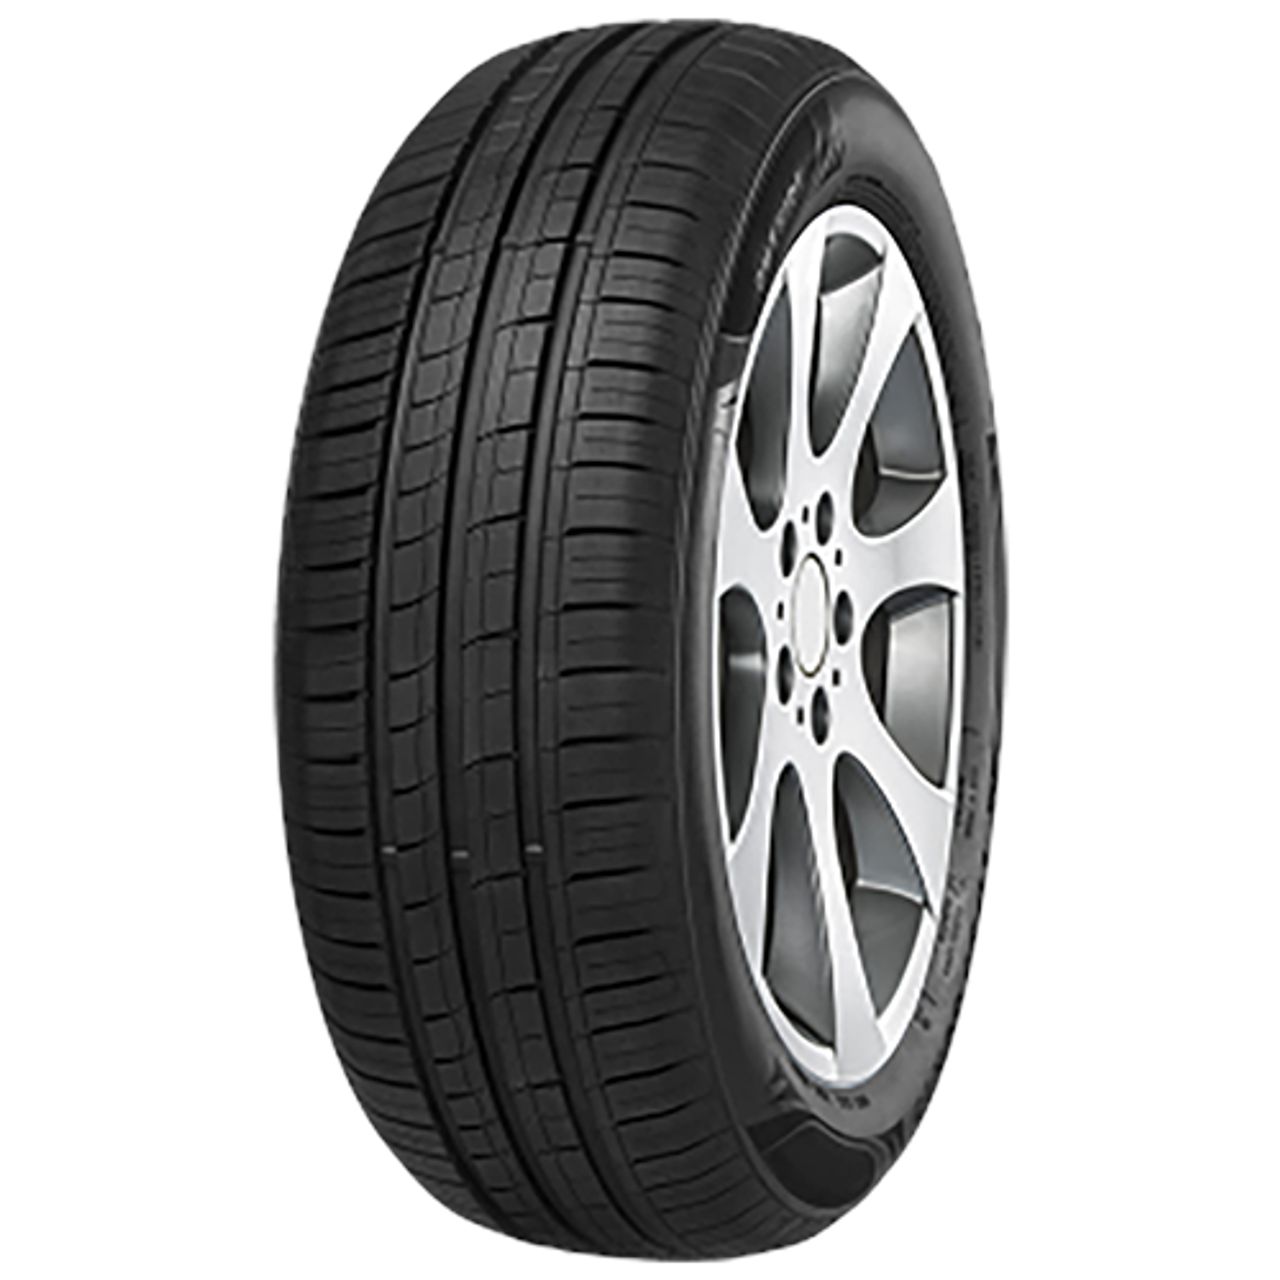 IMPERIAL ECODRIVER 4 185/65R15 92T